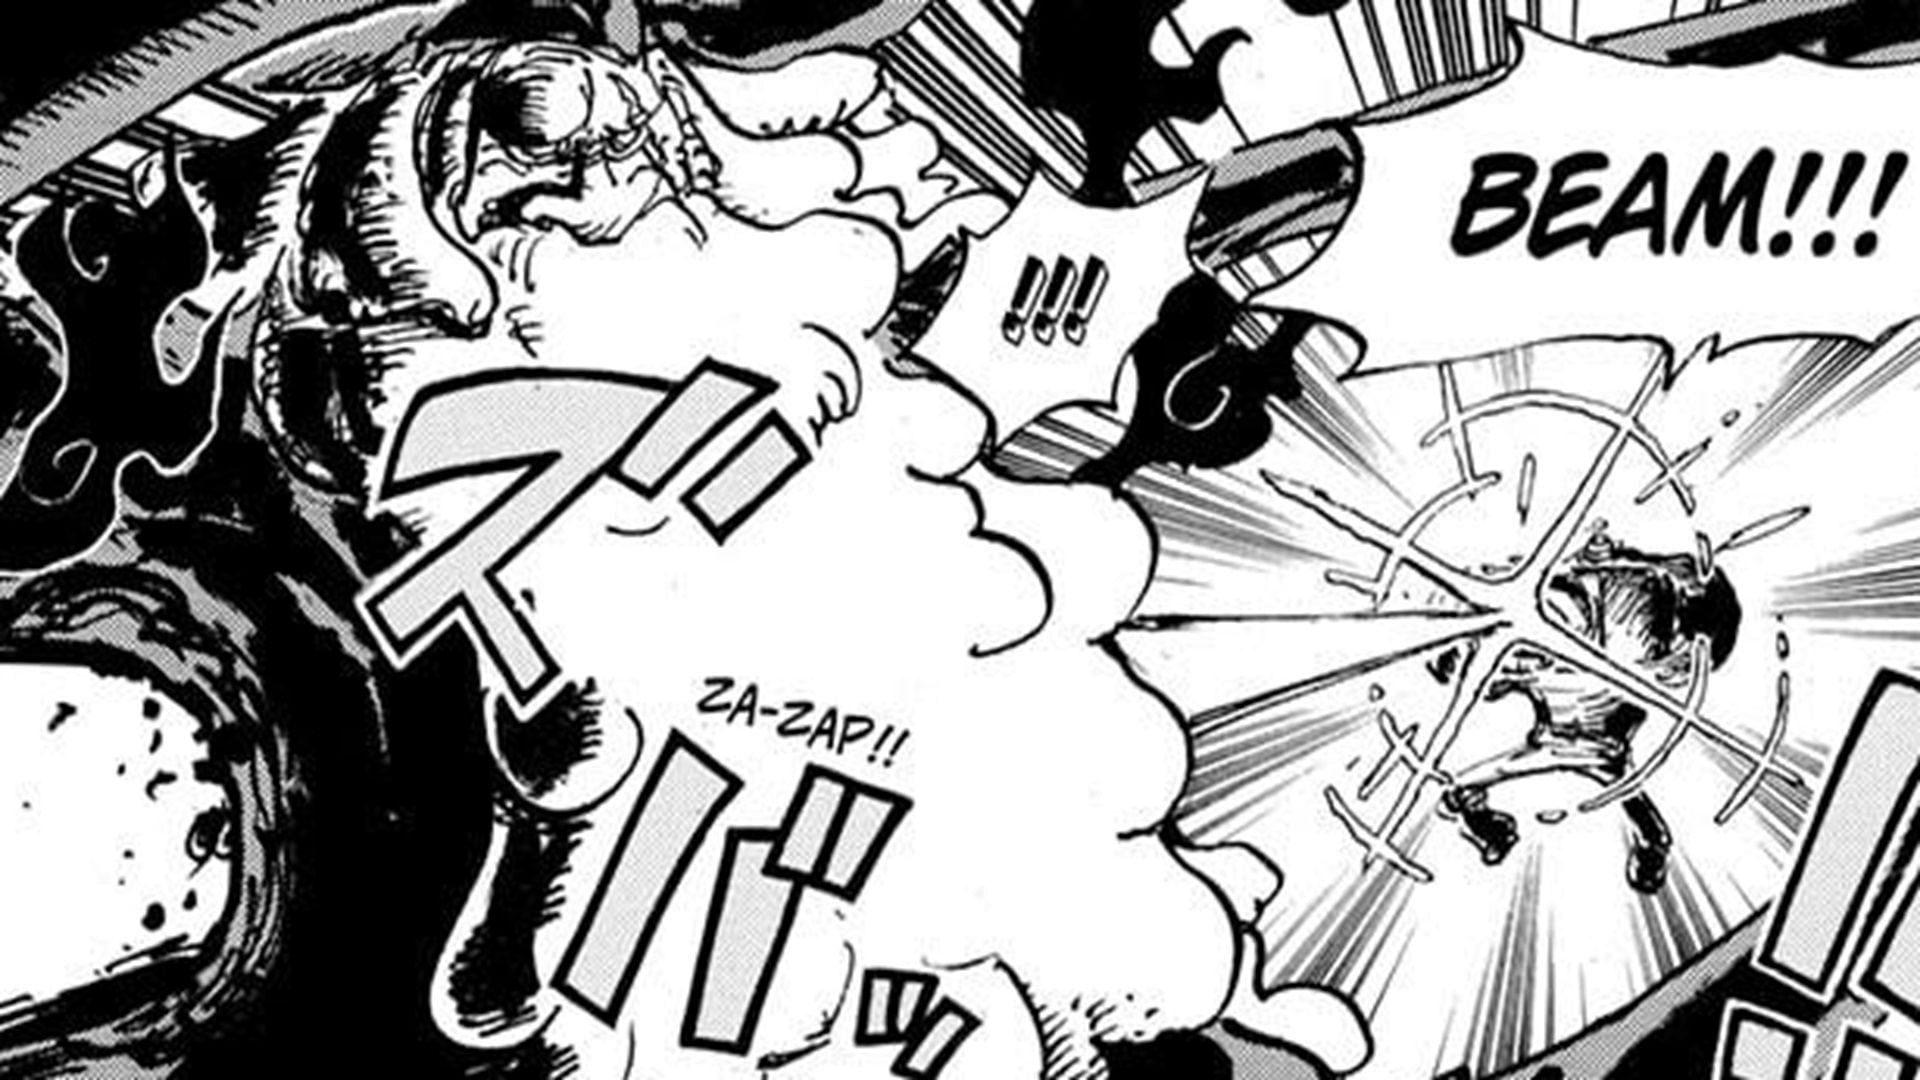 Franky attacking Saint Saturn in One Piece chapter 1104 (Image via Shueisha)